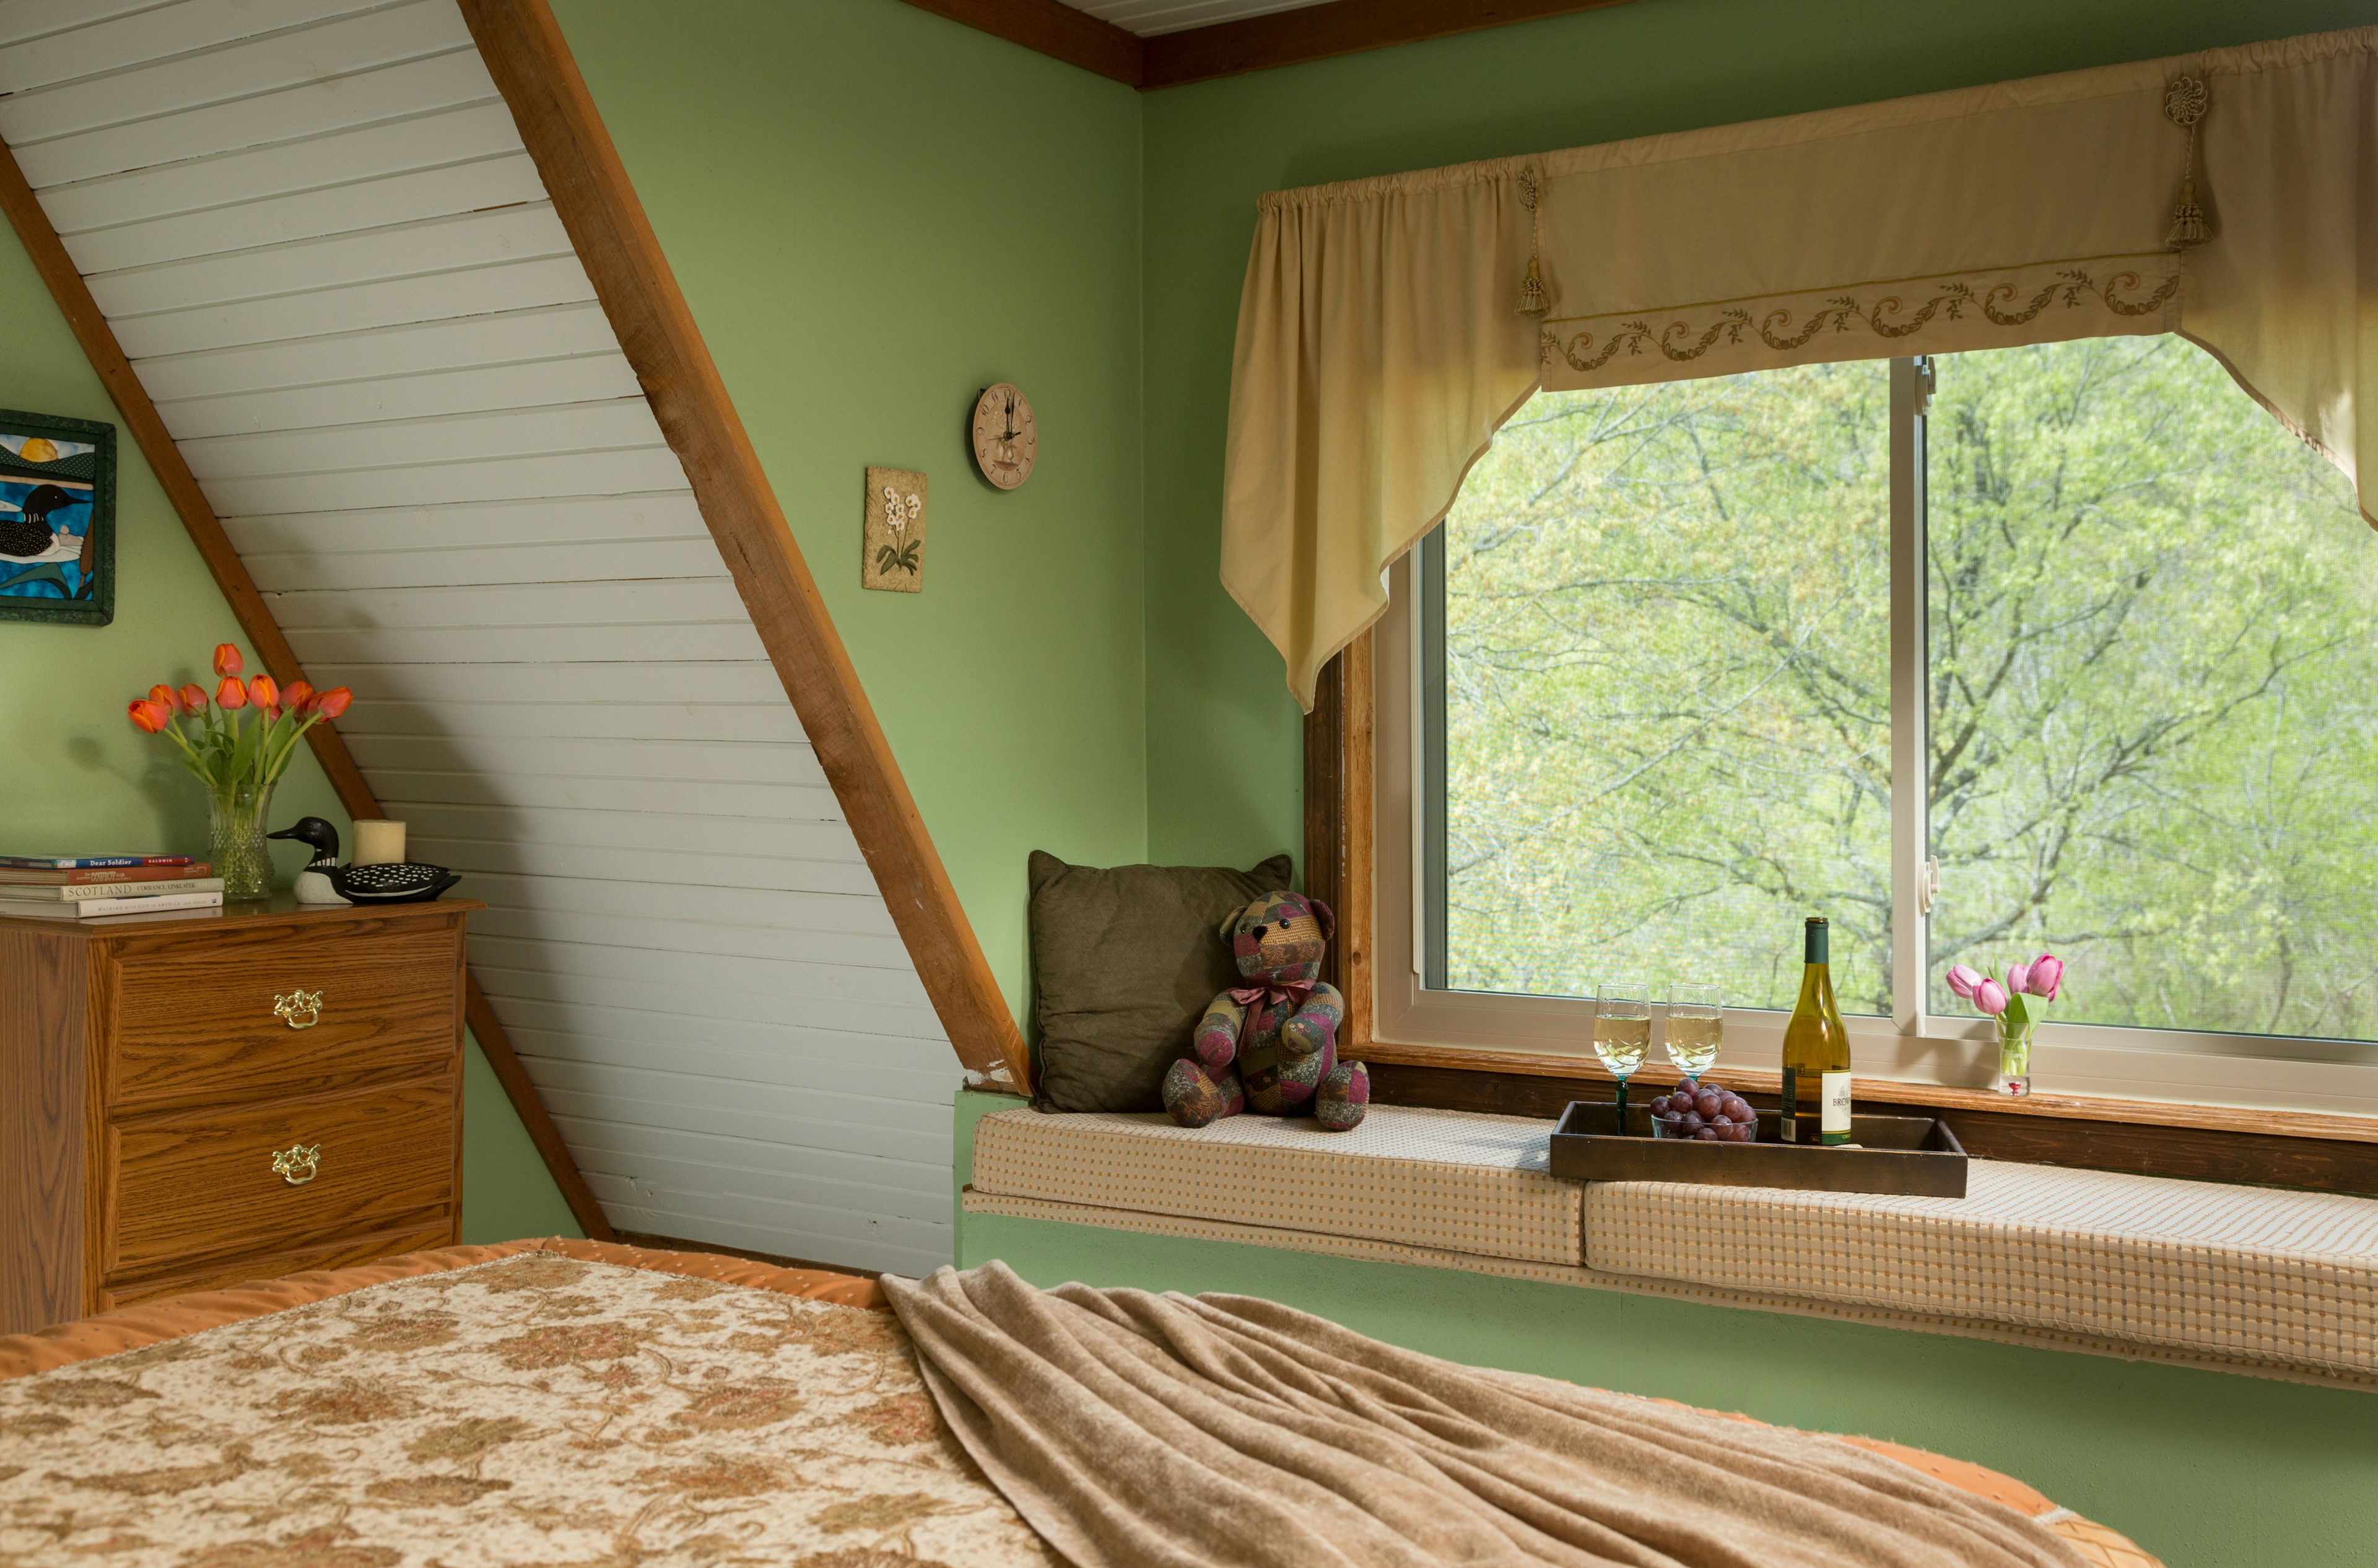 bedroom with part of a bed in the foreground.  On the bed are a quilt and throw blanket.  In front of the bed is a window seat with cushions.  On top of the cushions are a pillow, a stuffed bear, and a tray with a wine bottle and two glasses.  There is a large window above the window seat, overlooking trees.  To the left of the windowseat is a wooden dresser with flowers and books on top.